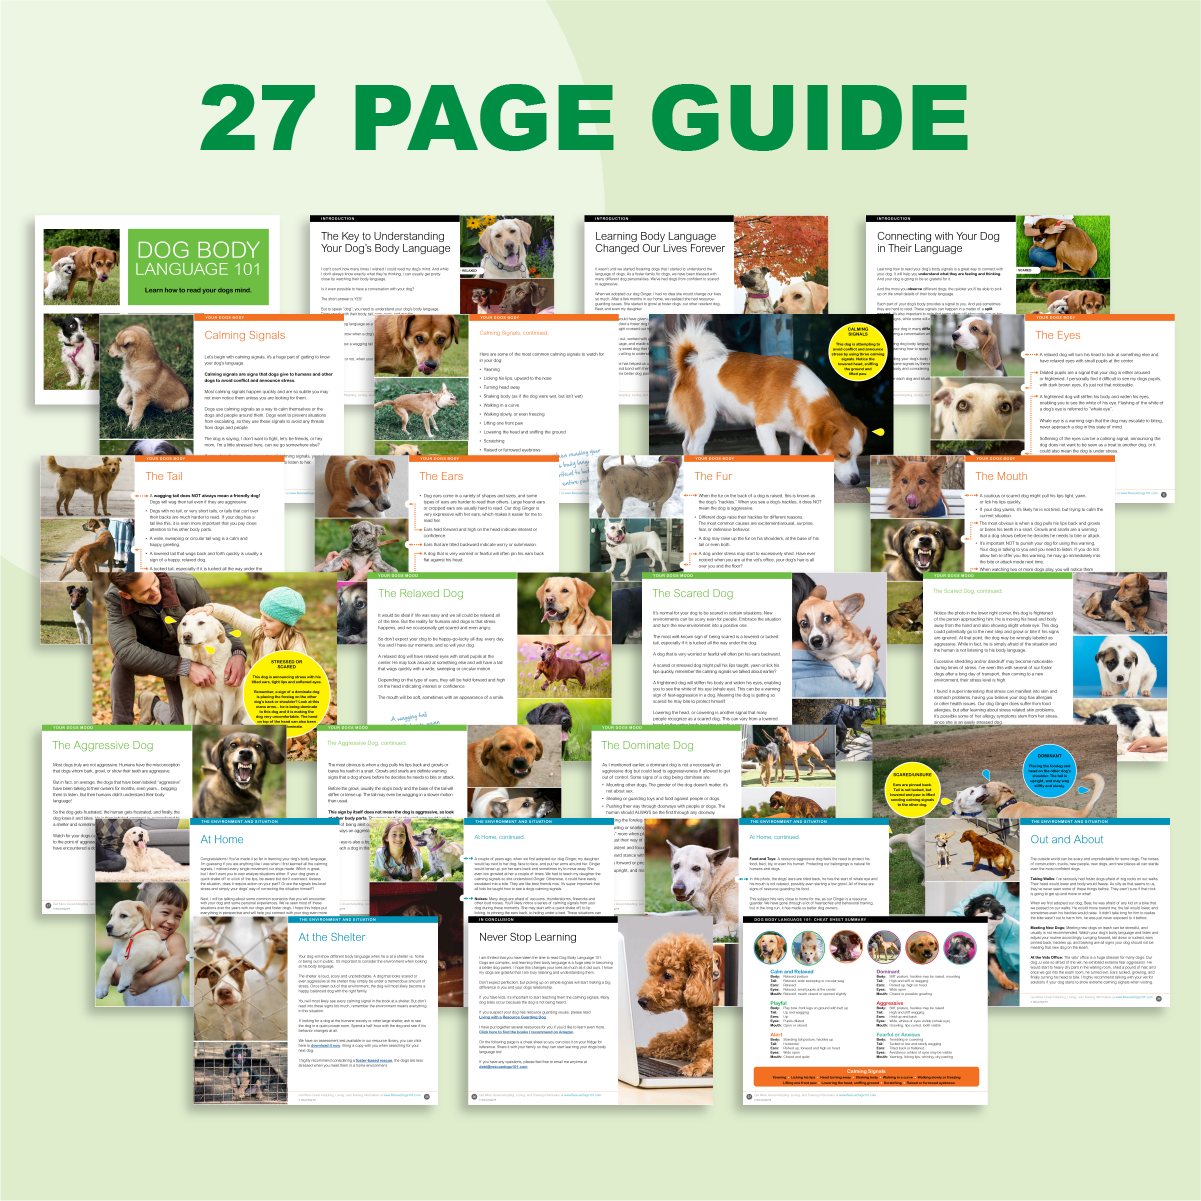 27 page, full color, dog body language guide